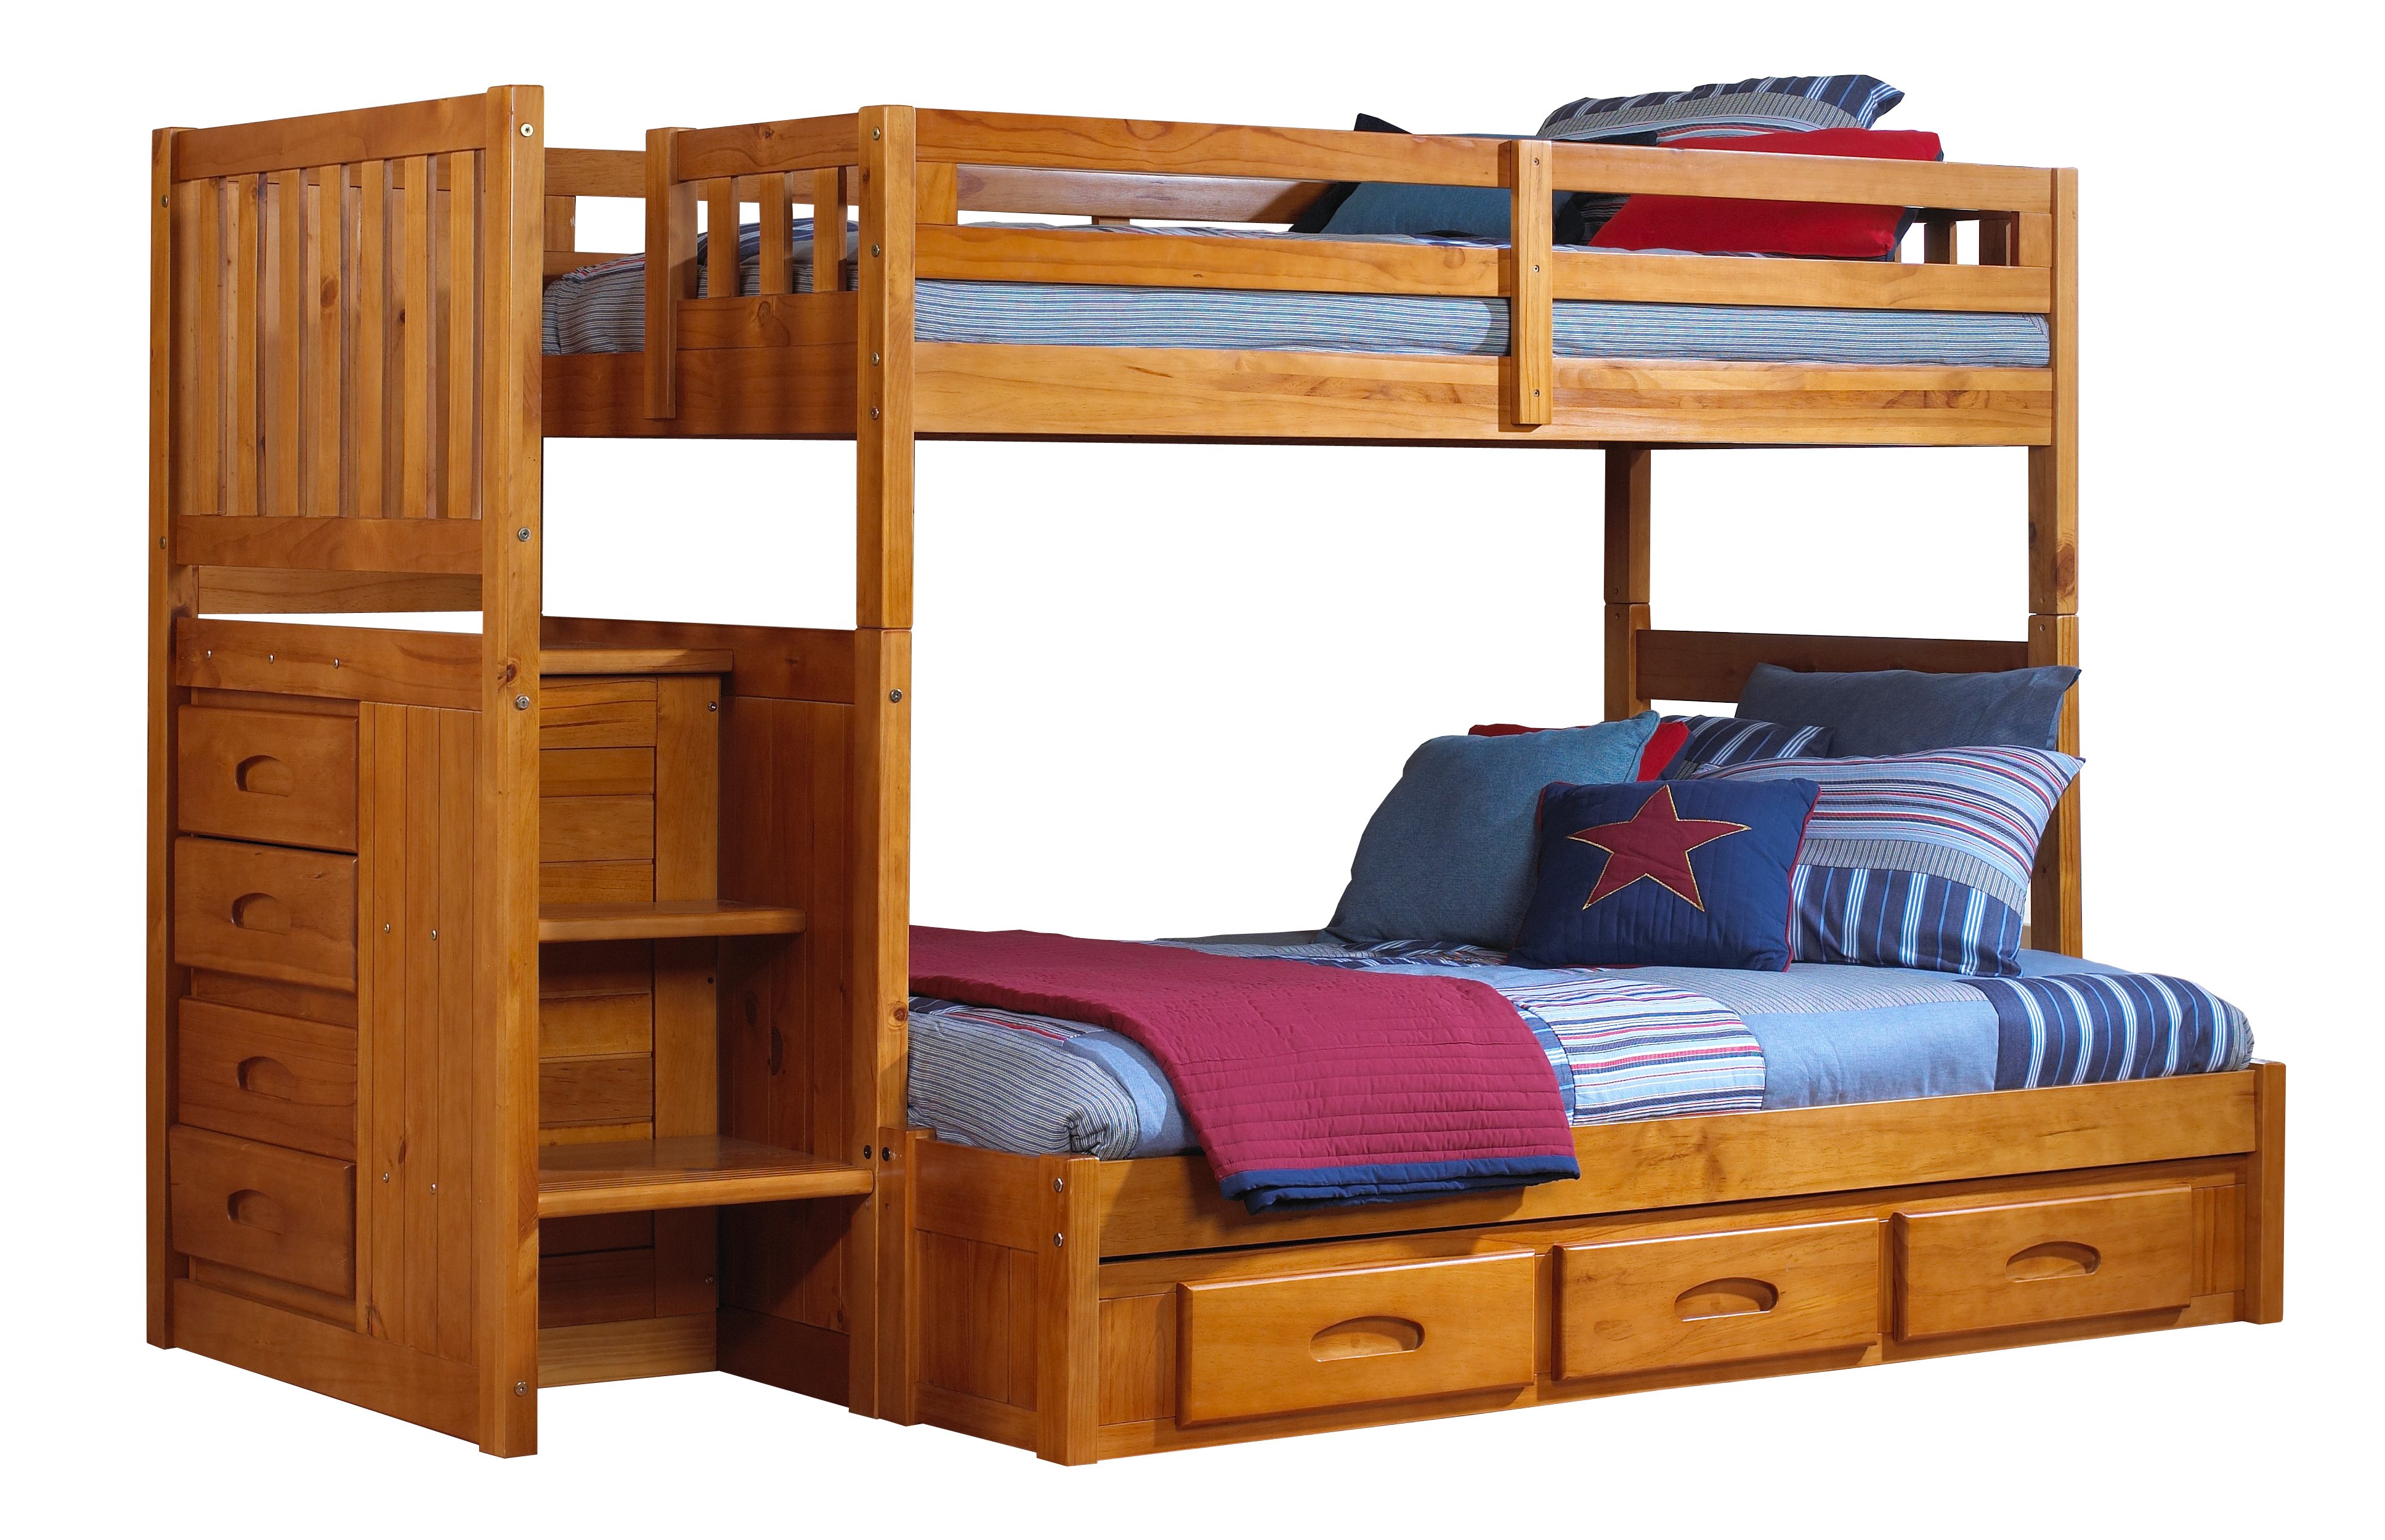 Honey Staircase Bunk Bed, Canyon Furniture Bunk Bed Instructions